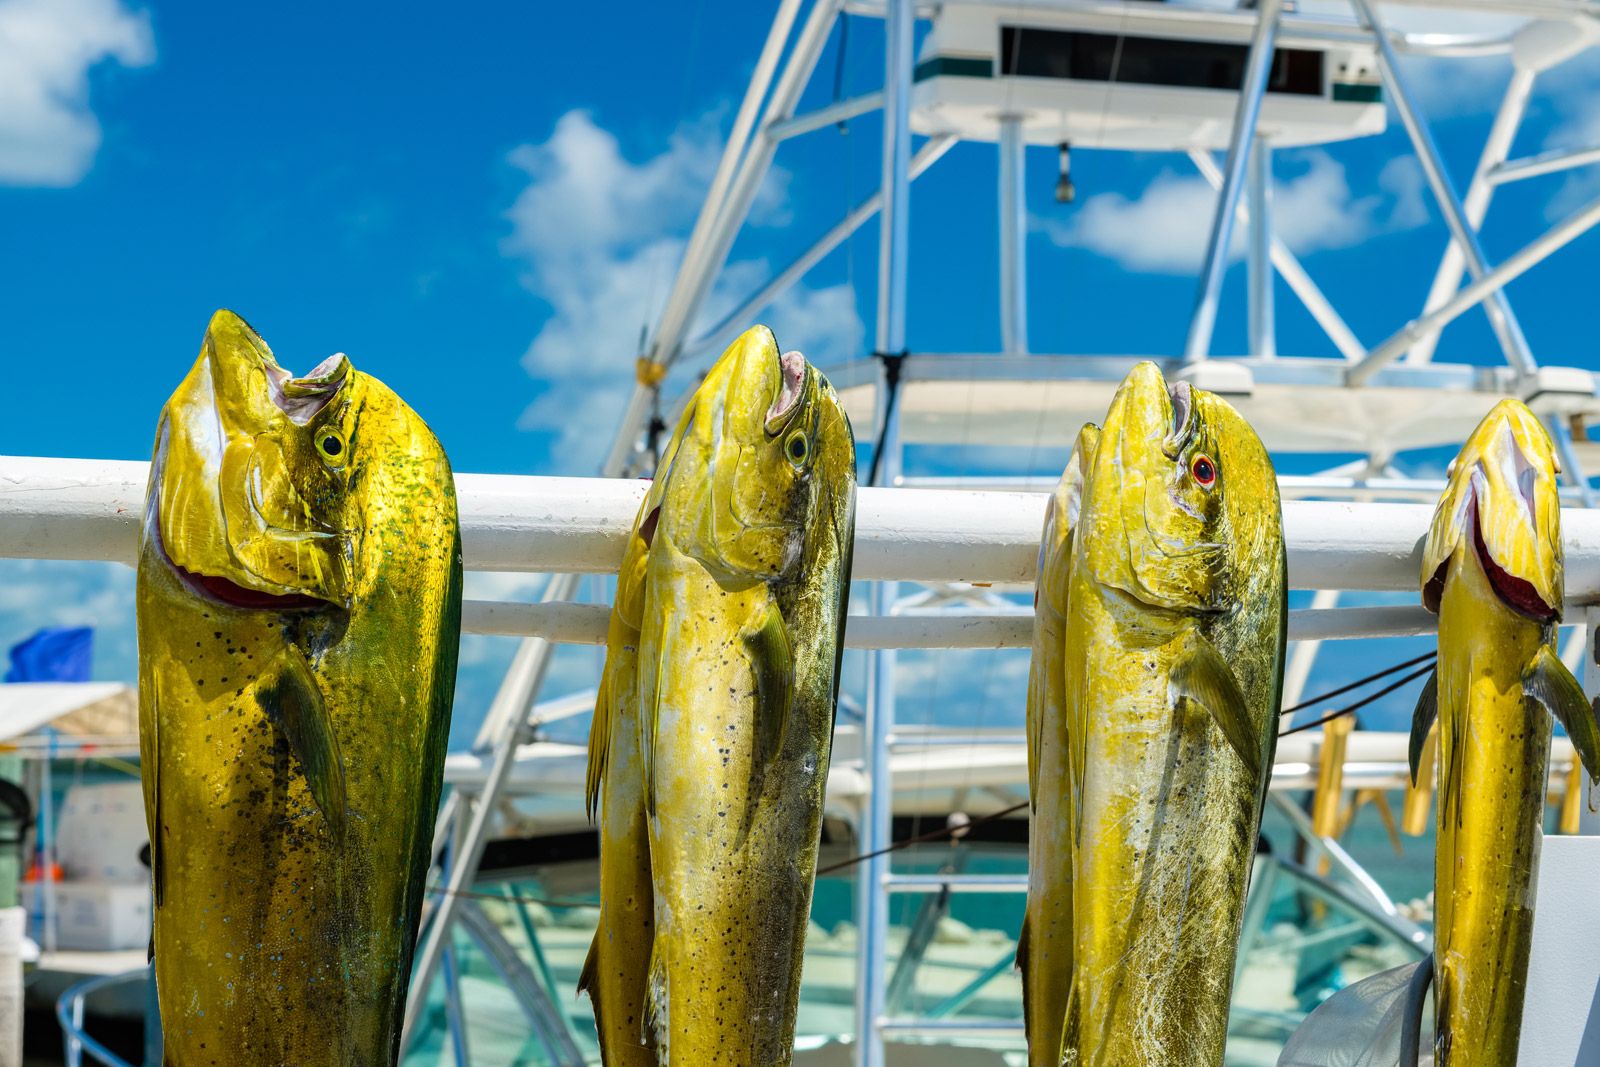 Types of Key West Fishing & Fishing Charters